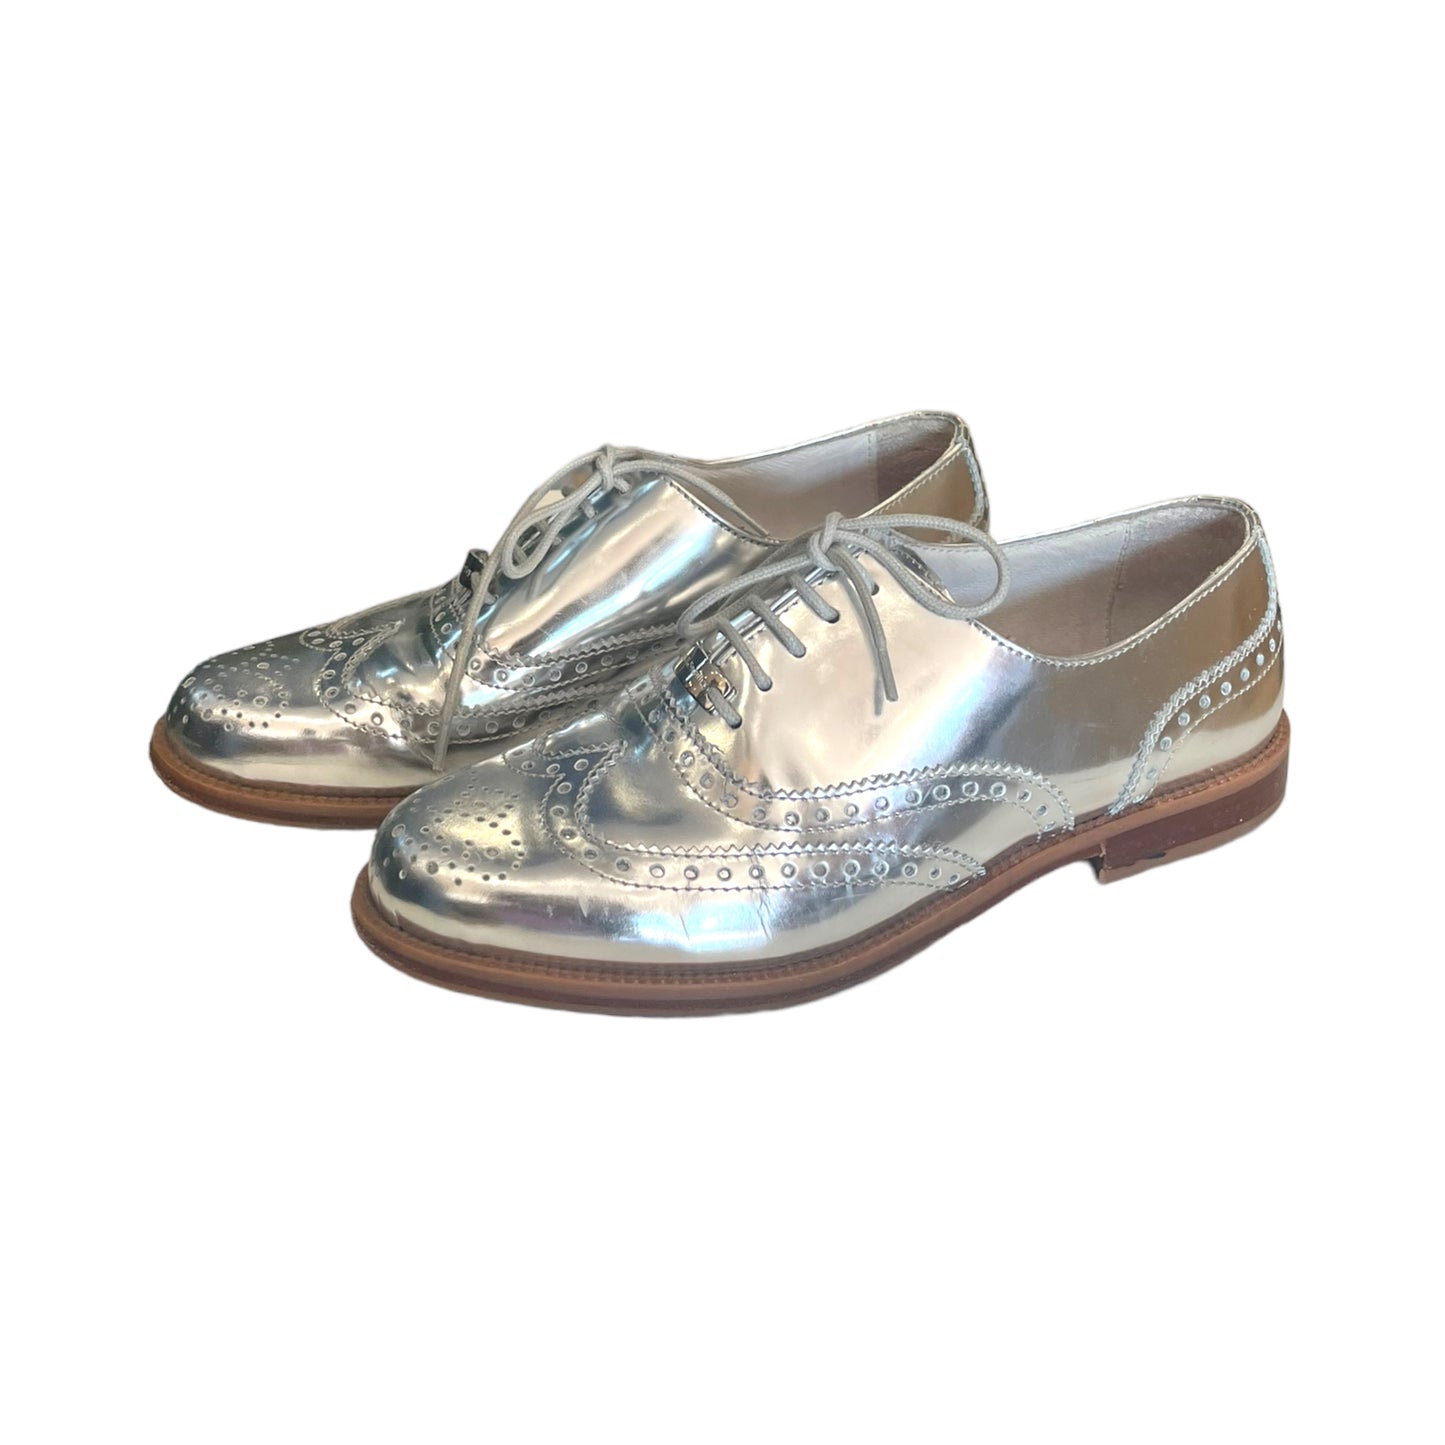 Russell and Bromley Silver Brogues